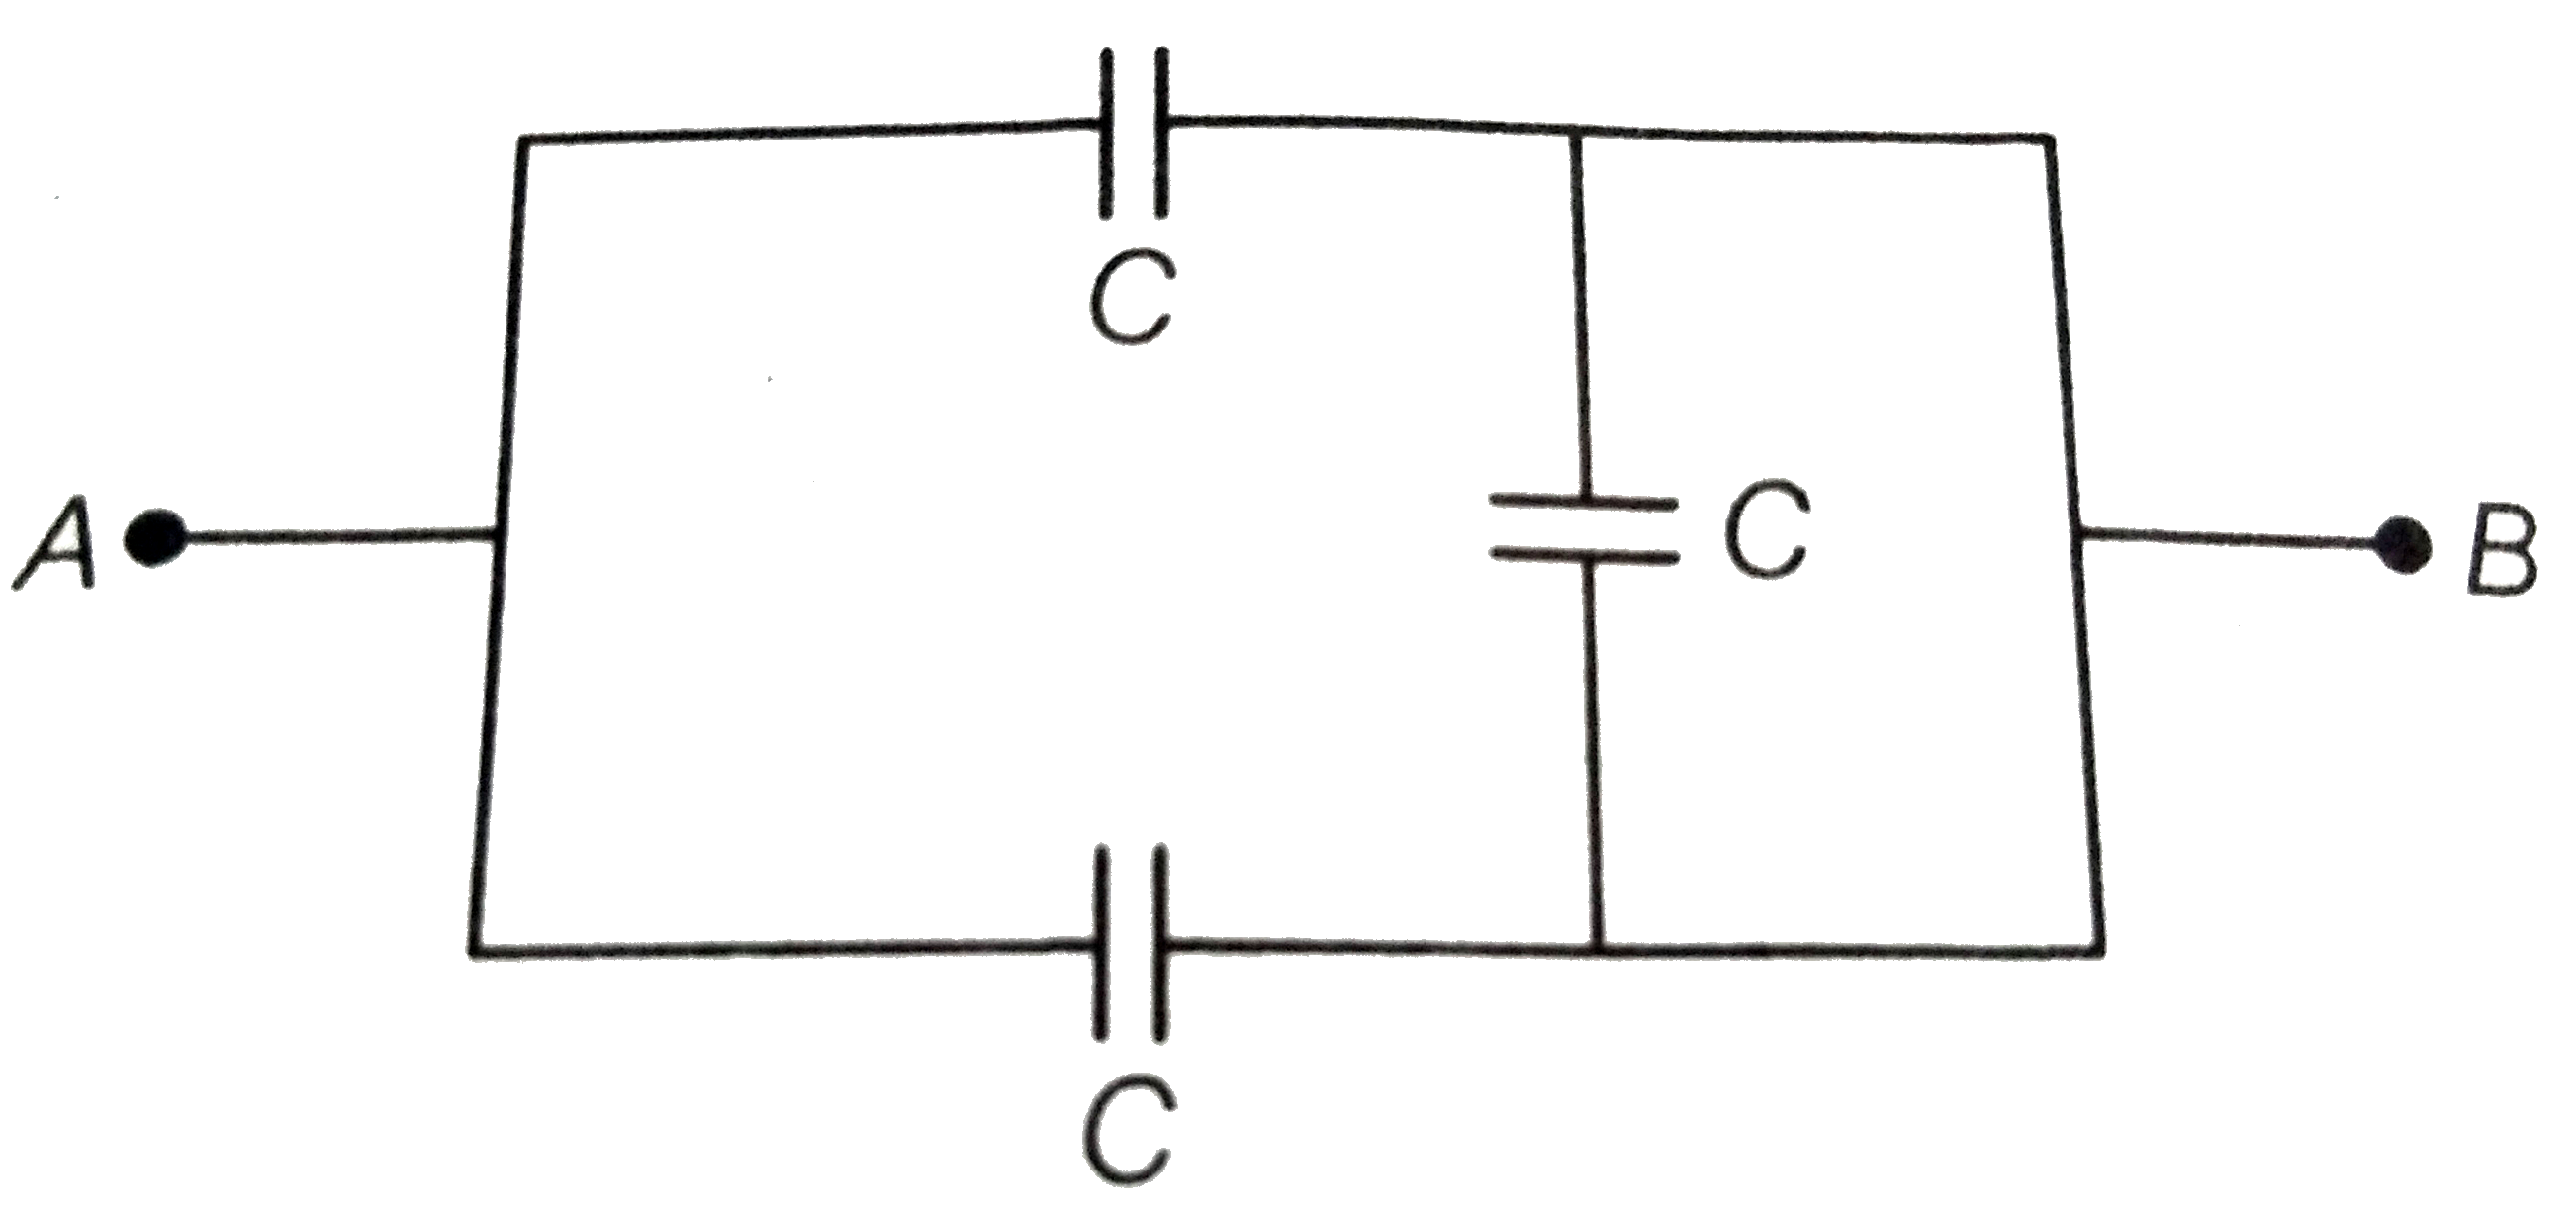 The equivalent capacitance of the combination of three capacitors each of capacitance C between A and B as shown in figure, is